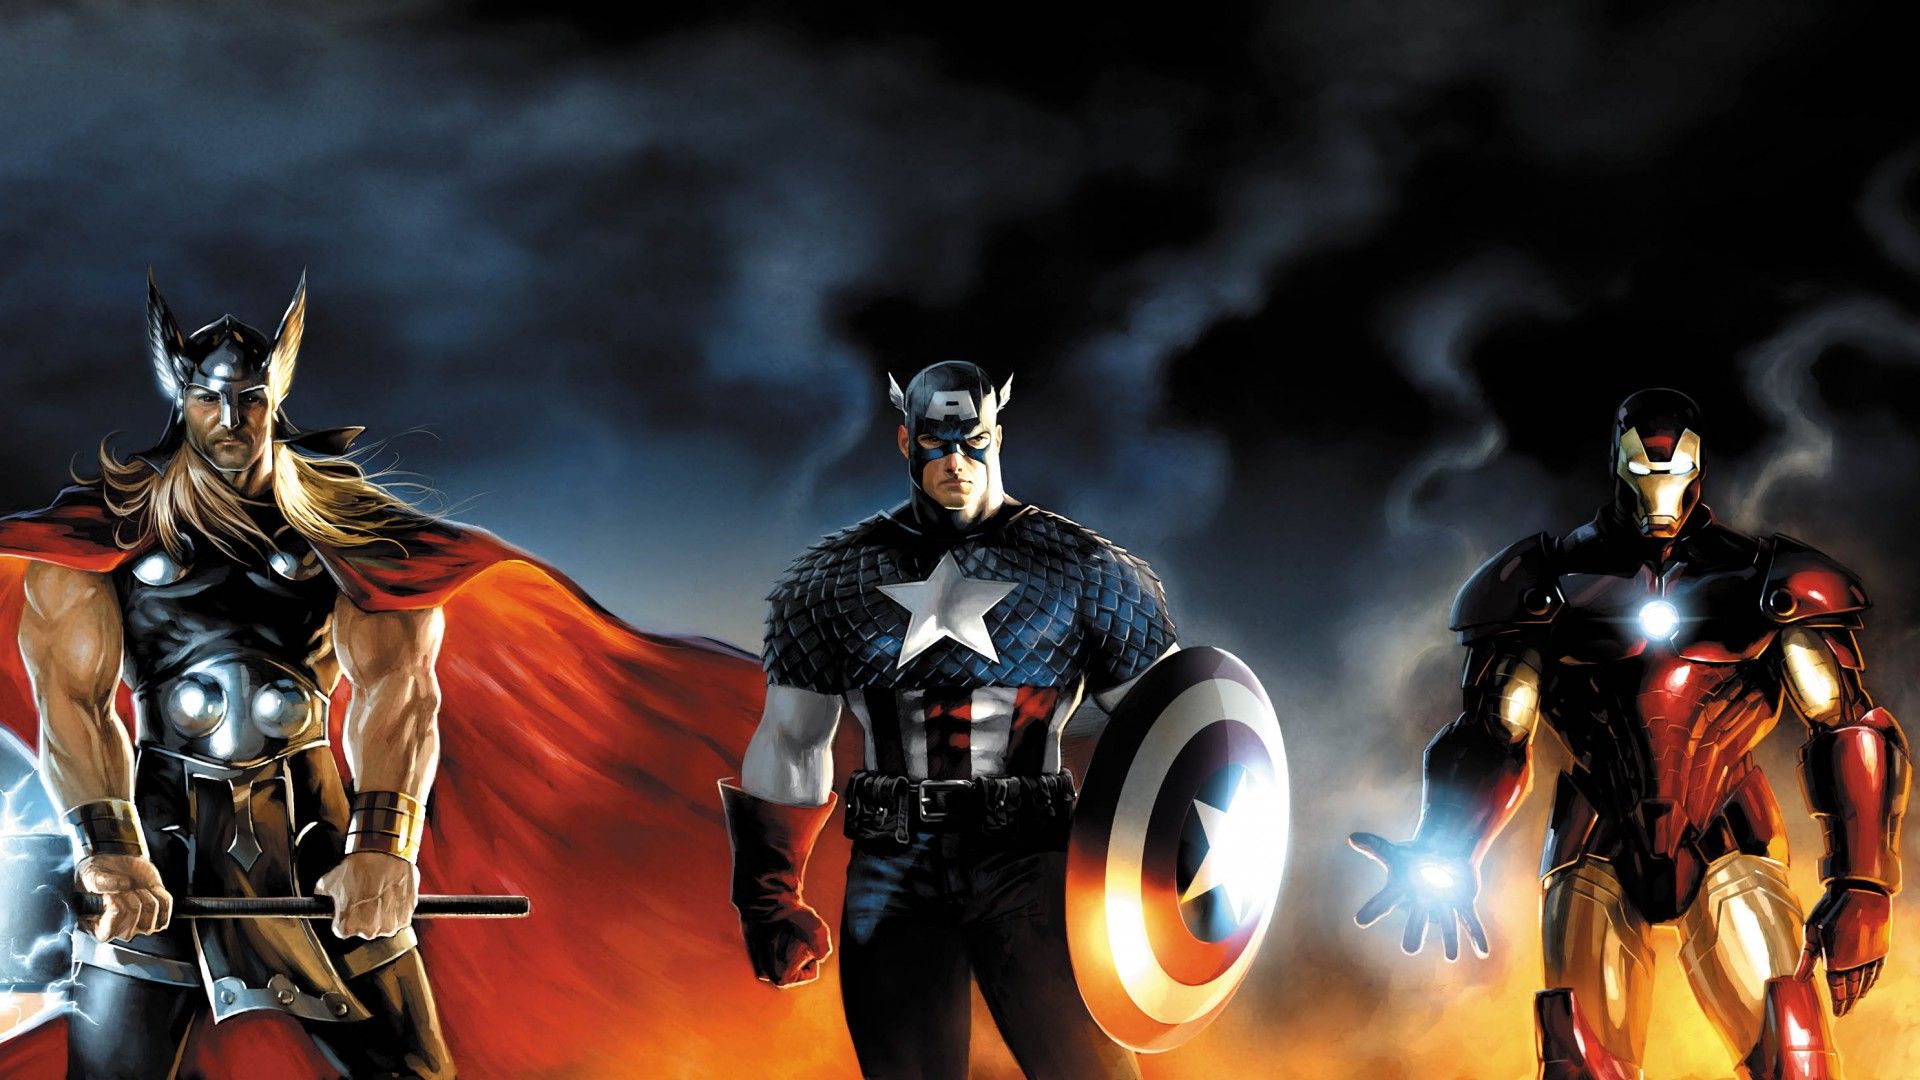 Comics Avengers Best Quality Awesome Wallpapers - All HD Wallpapers